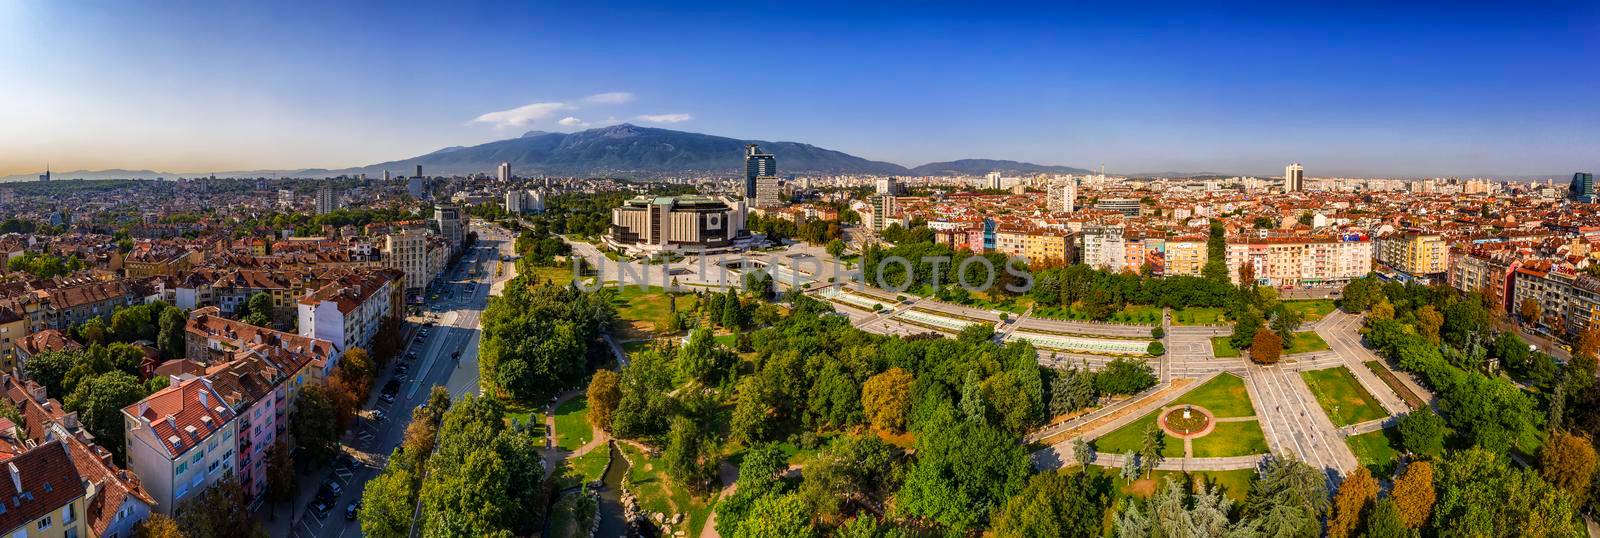 Sofia, Bulgaria - August 22, 2019: Amazing aerial panorama of the city center and National Palace of Culture in the city of Sofia,  capital of Bulgaria